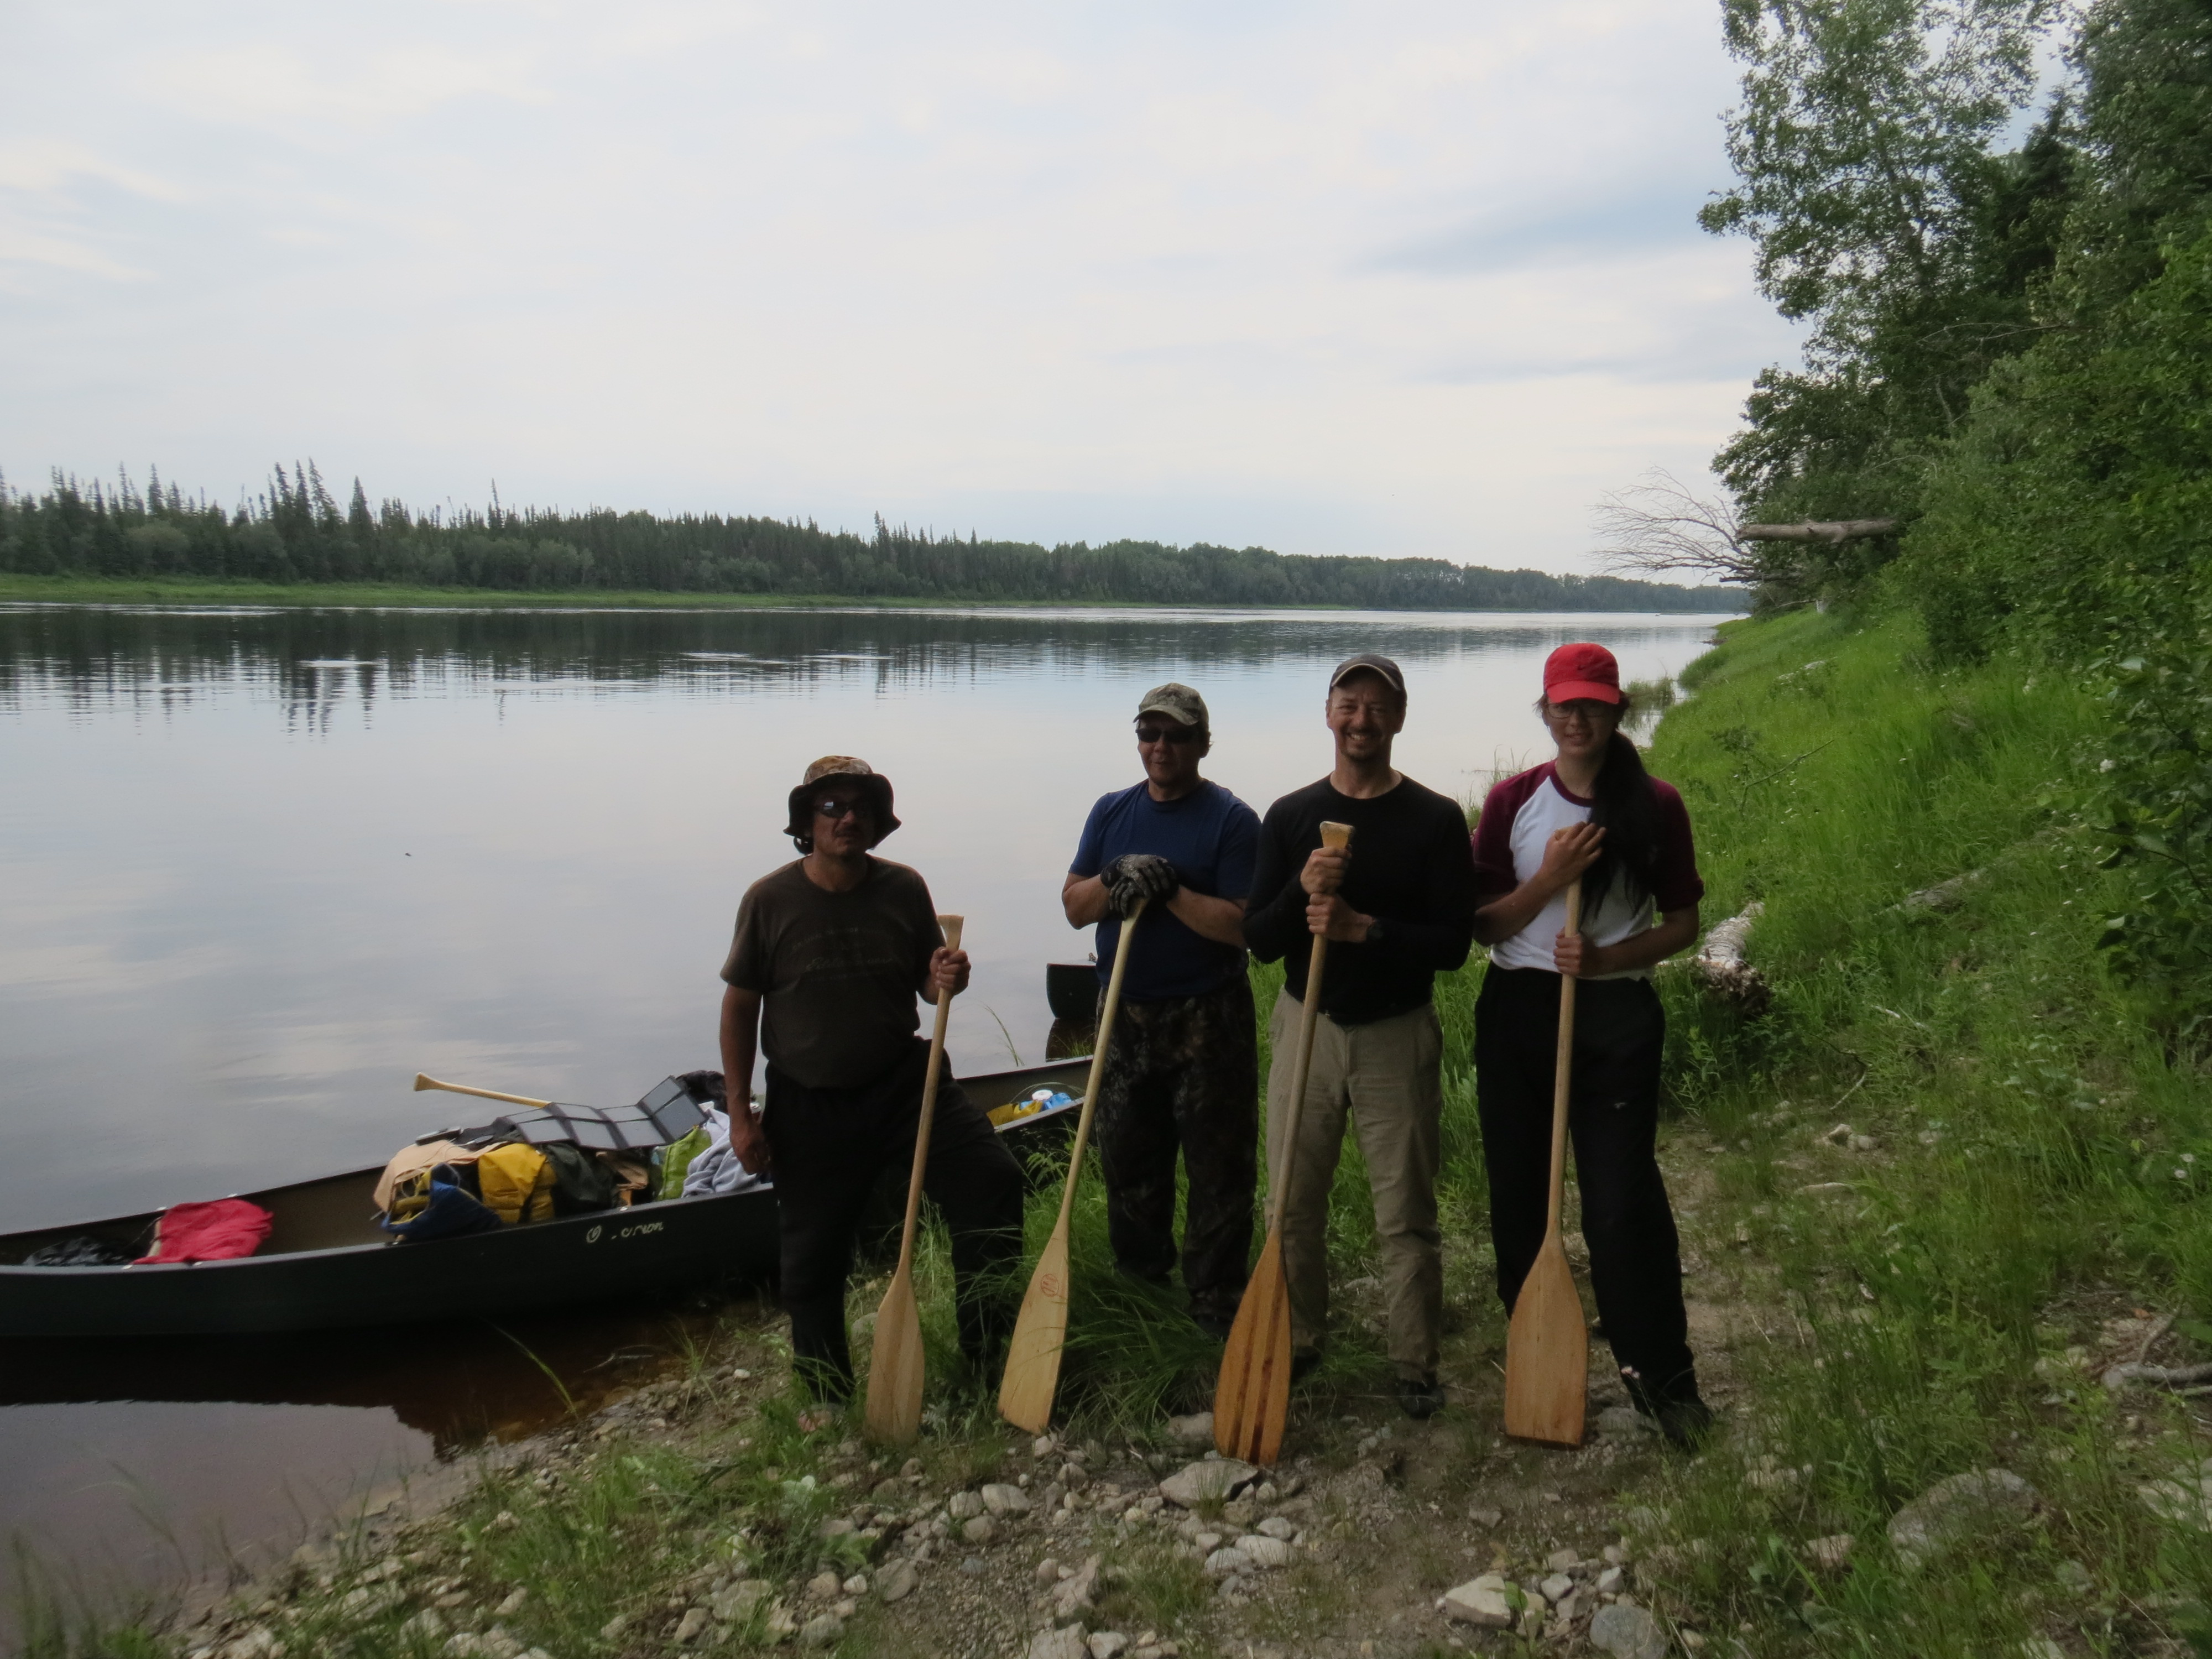 North French River Biodiversity Expedition– July 1 to July 11, 2015 Ted